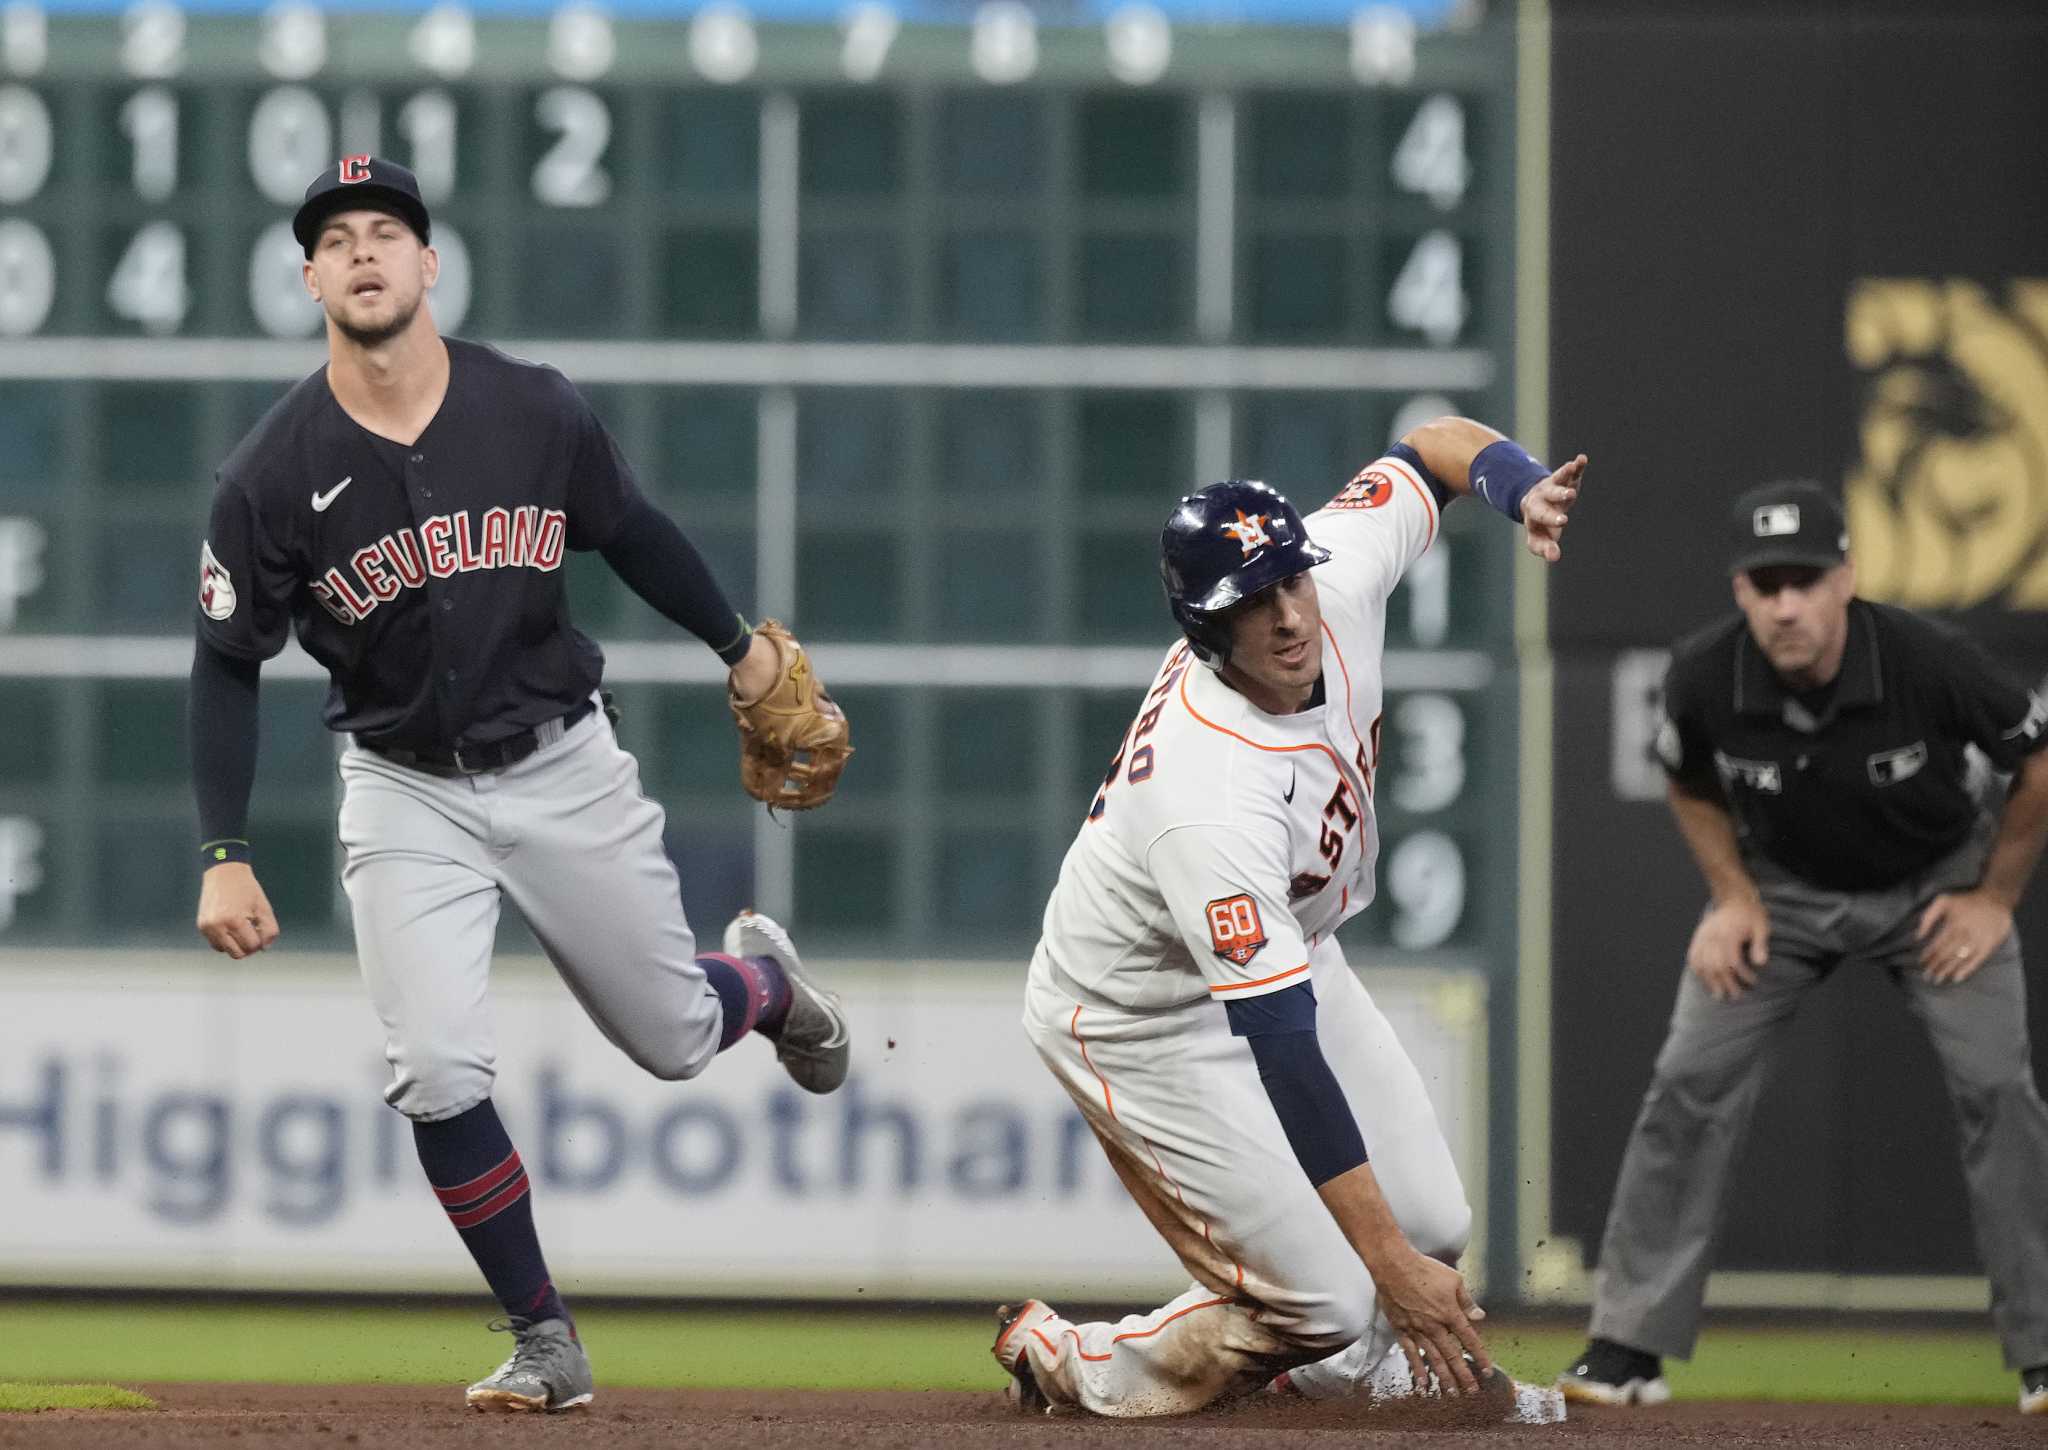 How to Watch the Astros vs. Guardians Game: Streaming & TV Info